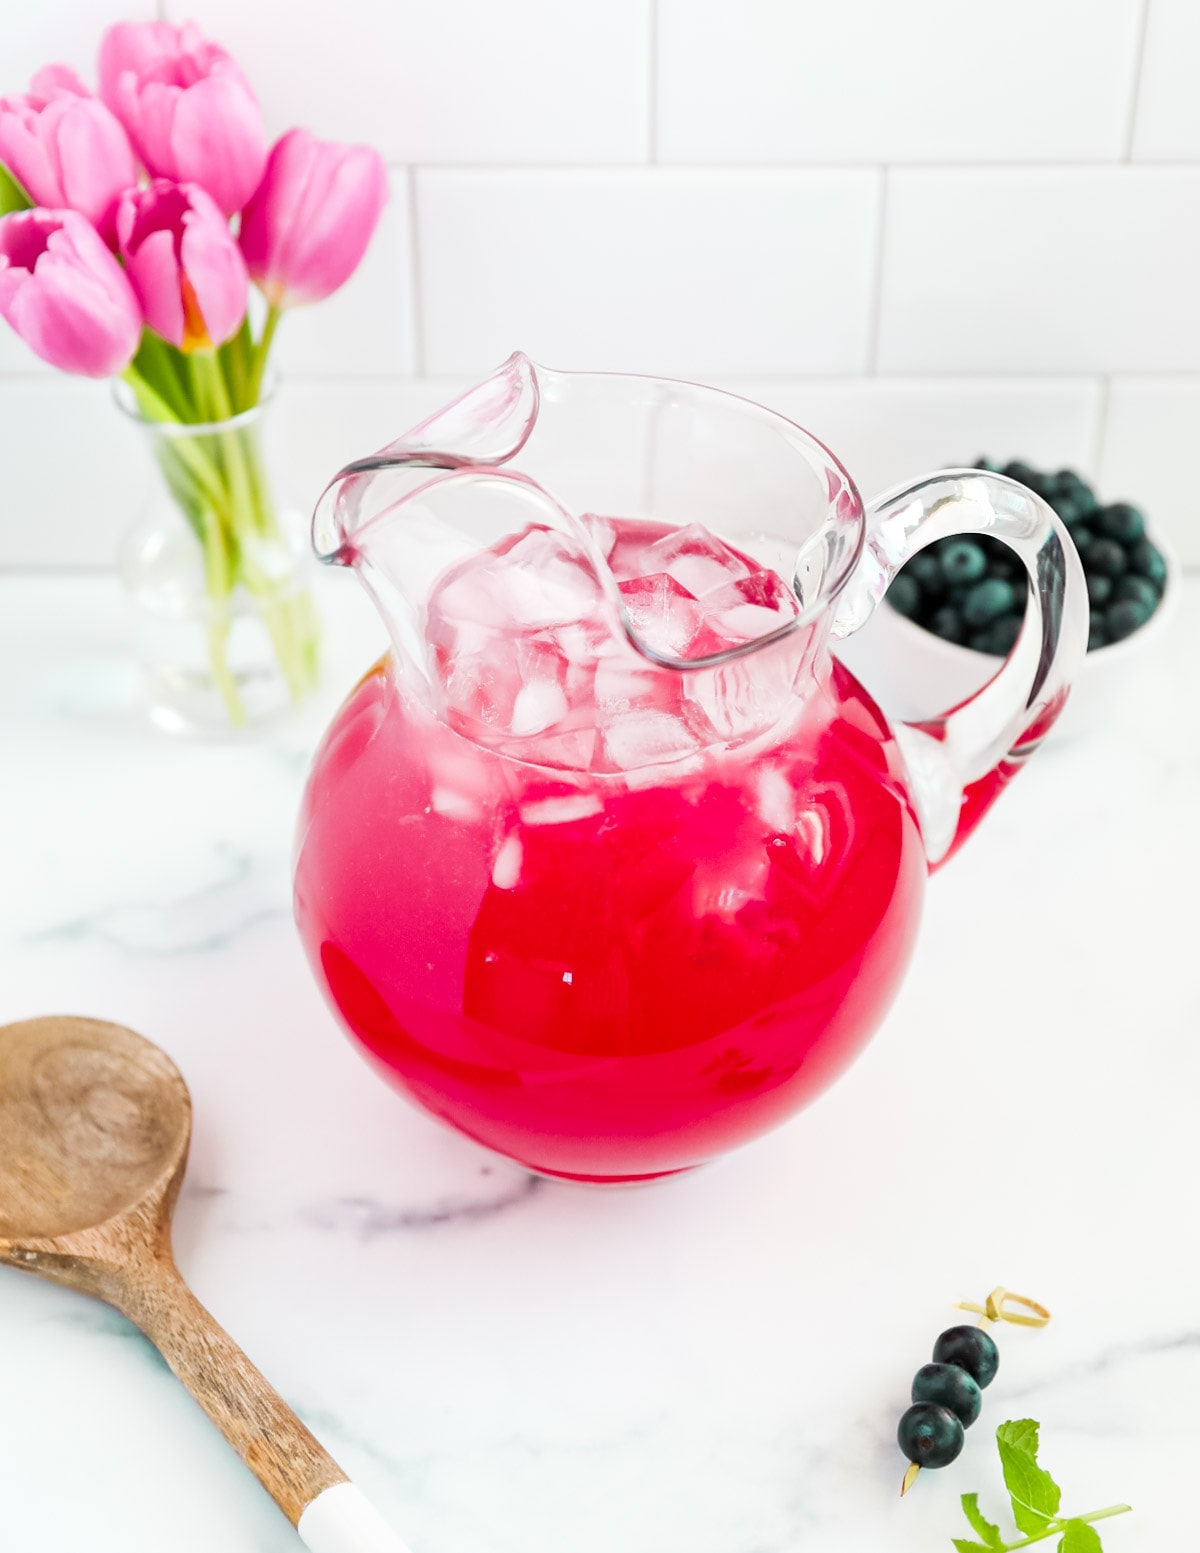 A clear glass pitcher filled with bright pink lemonade. There are ice cubes in the pitcher and flowers, berries, and a spoon outside